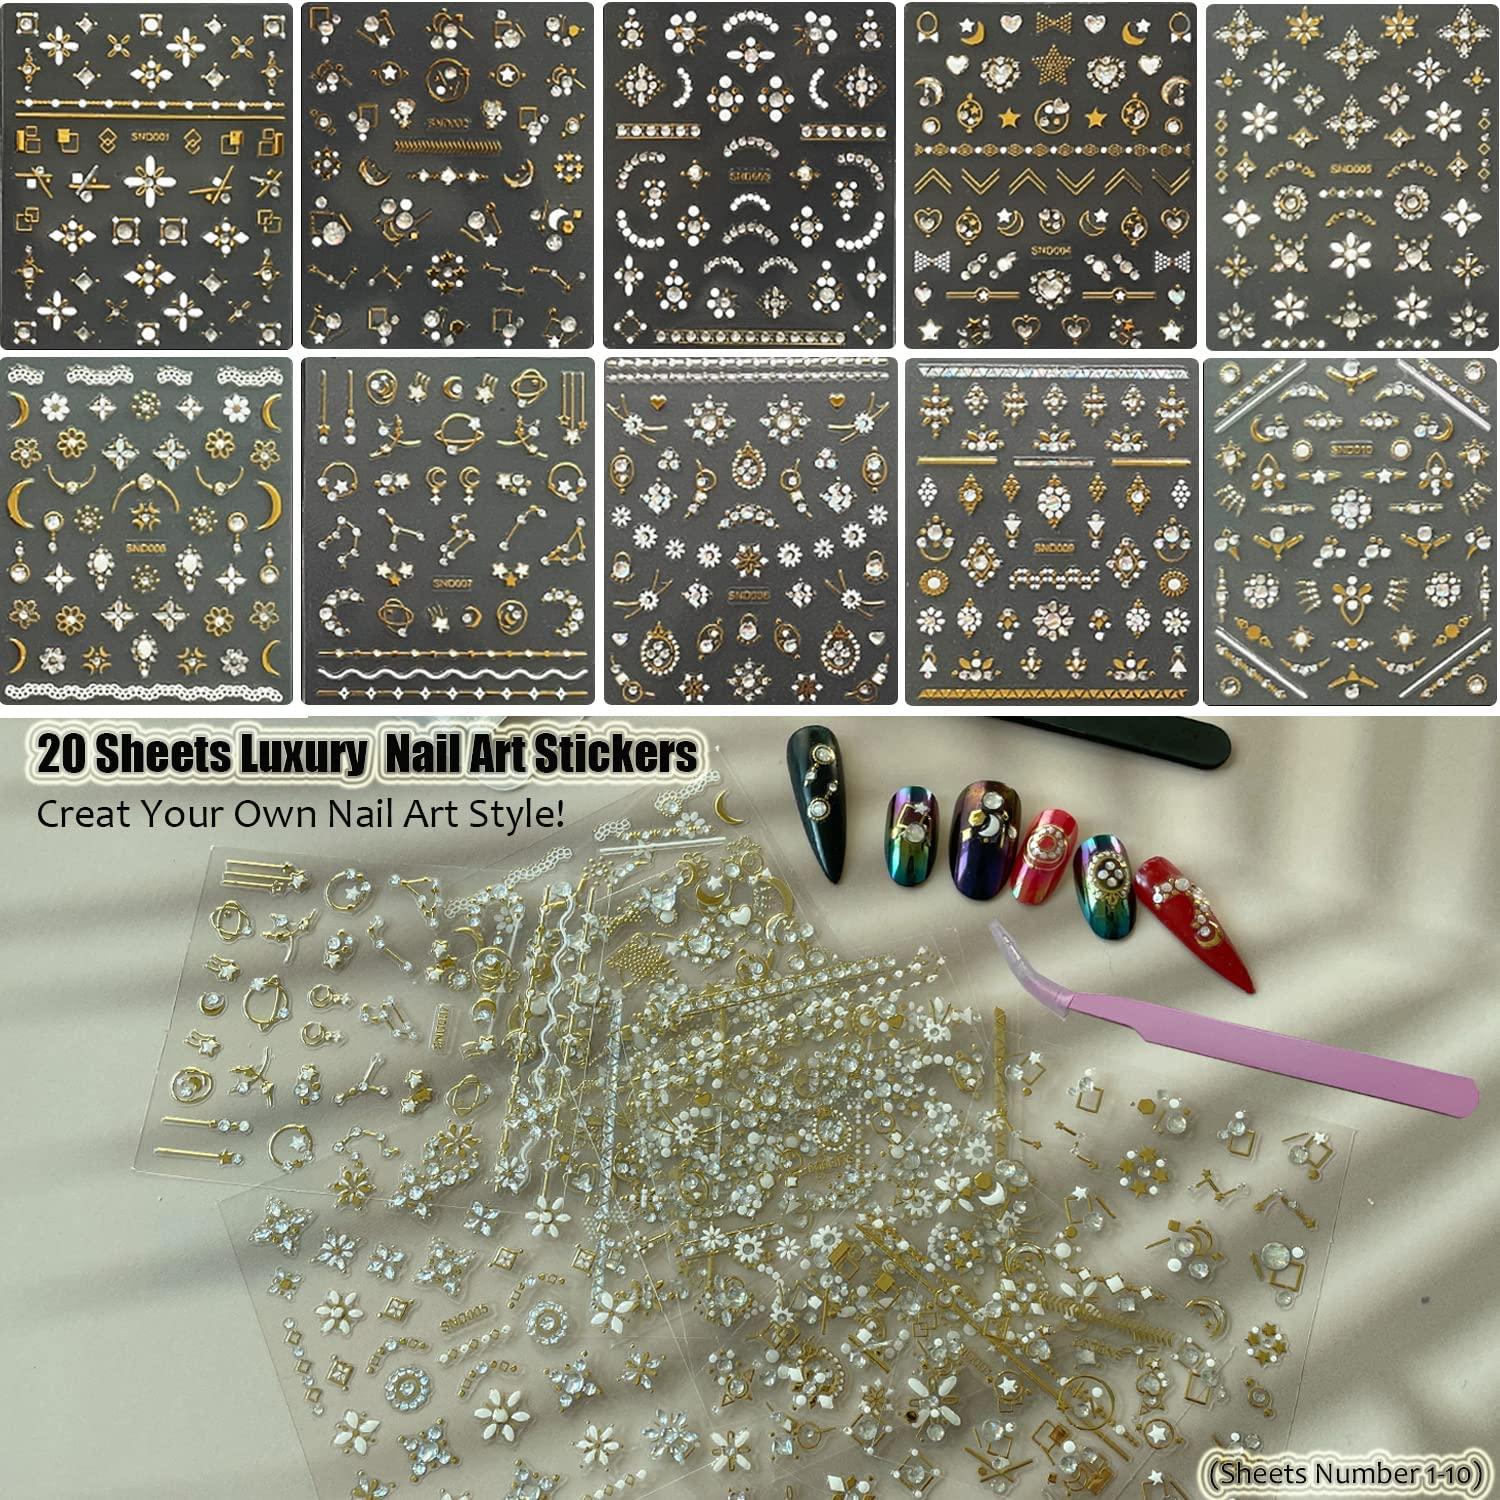 1 Lage Sheet Gold Shiny Nail Stickers Luxury Nail Salon Design Chic 3D Nail Art Stickers Decals Self-Adhesive Manicure for Nails Decoration (004)